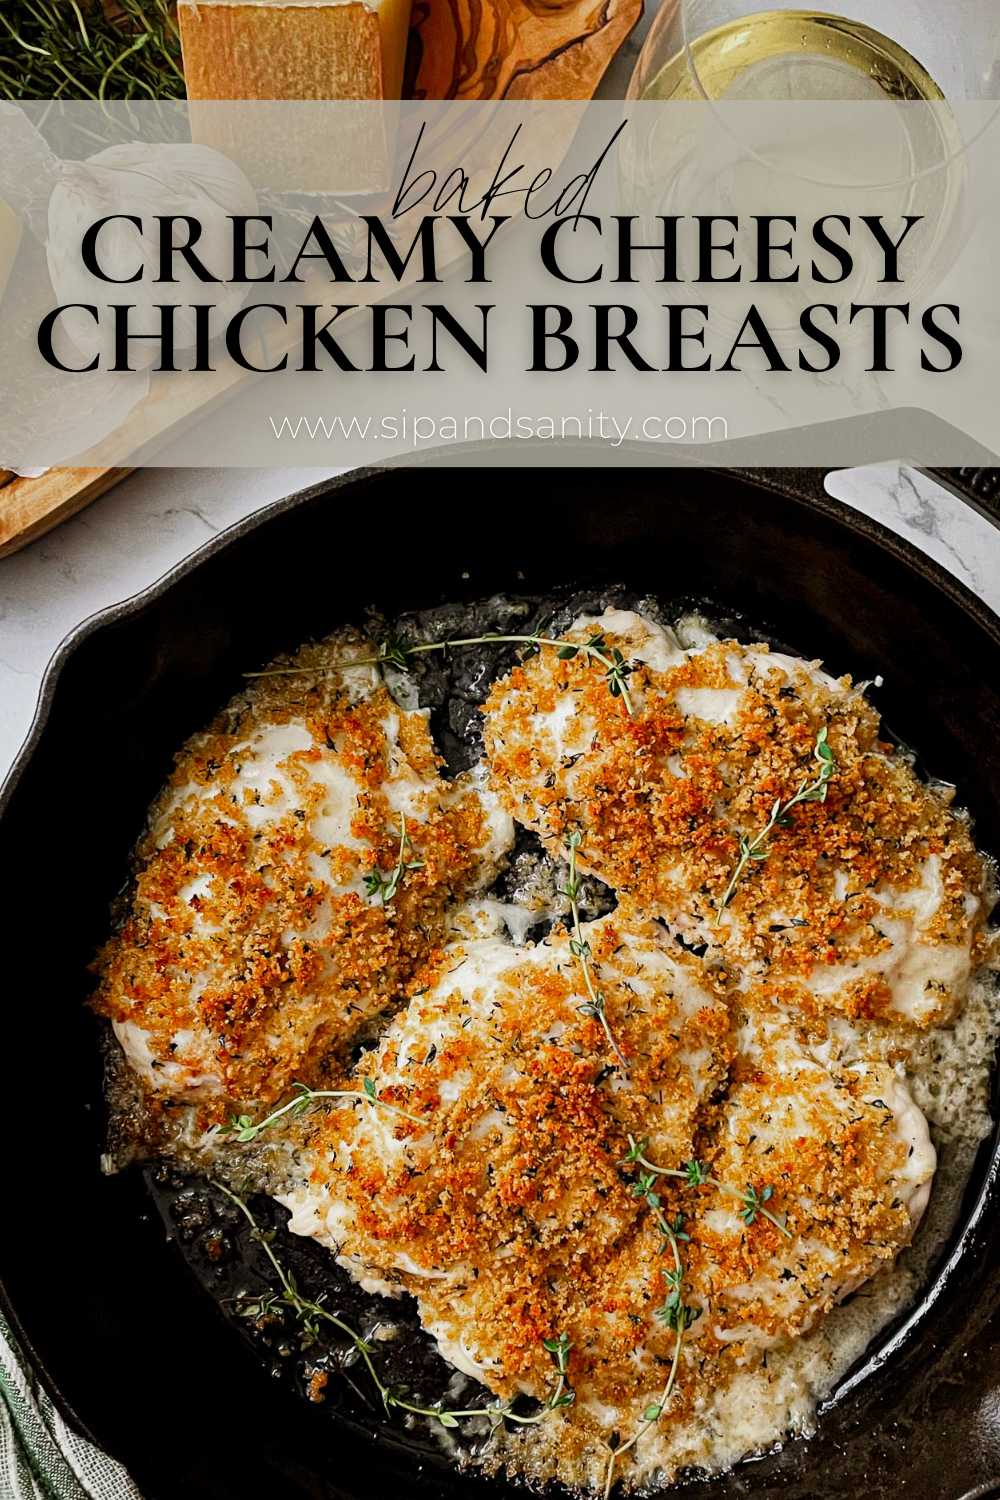 Pin image for baked creamy cheesy chicken breasts.